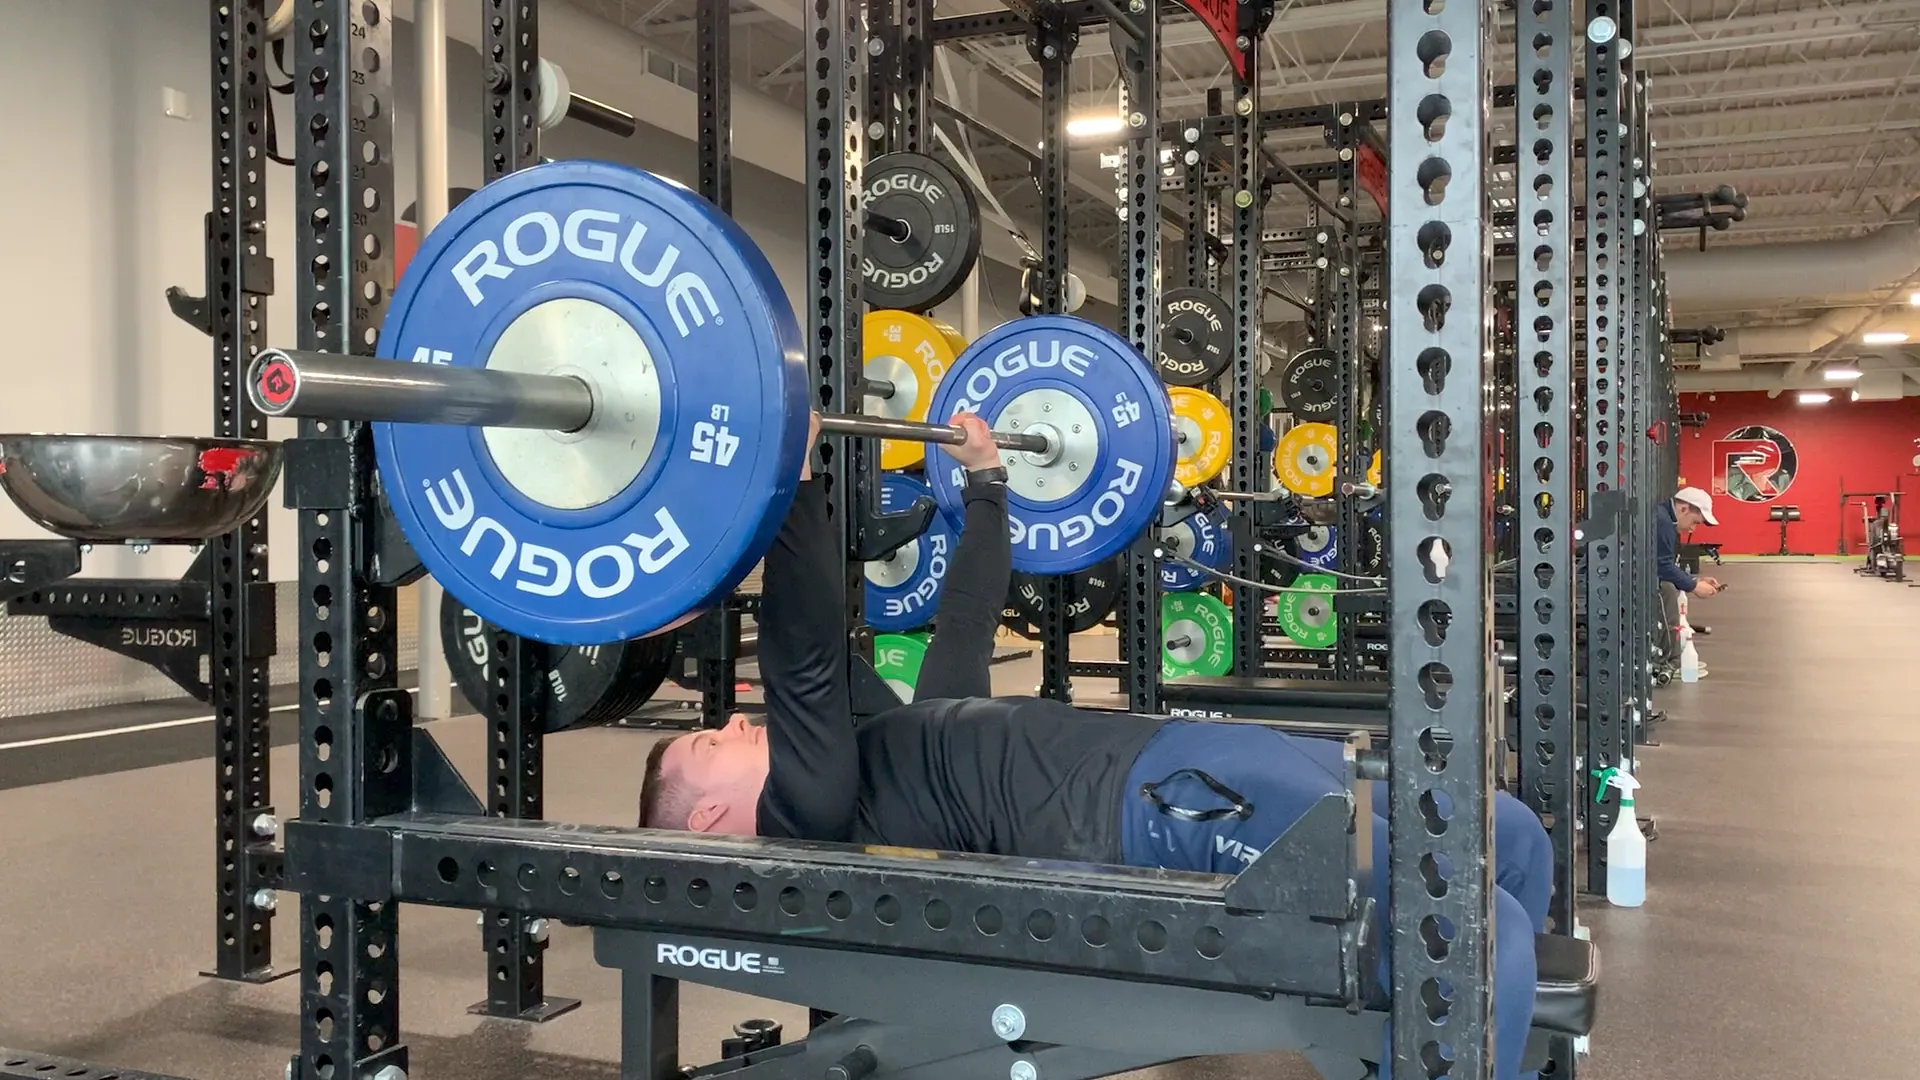 Top 3 Tips For Shoulder Pain While Benching